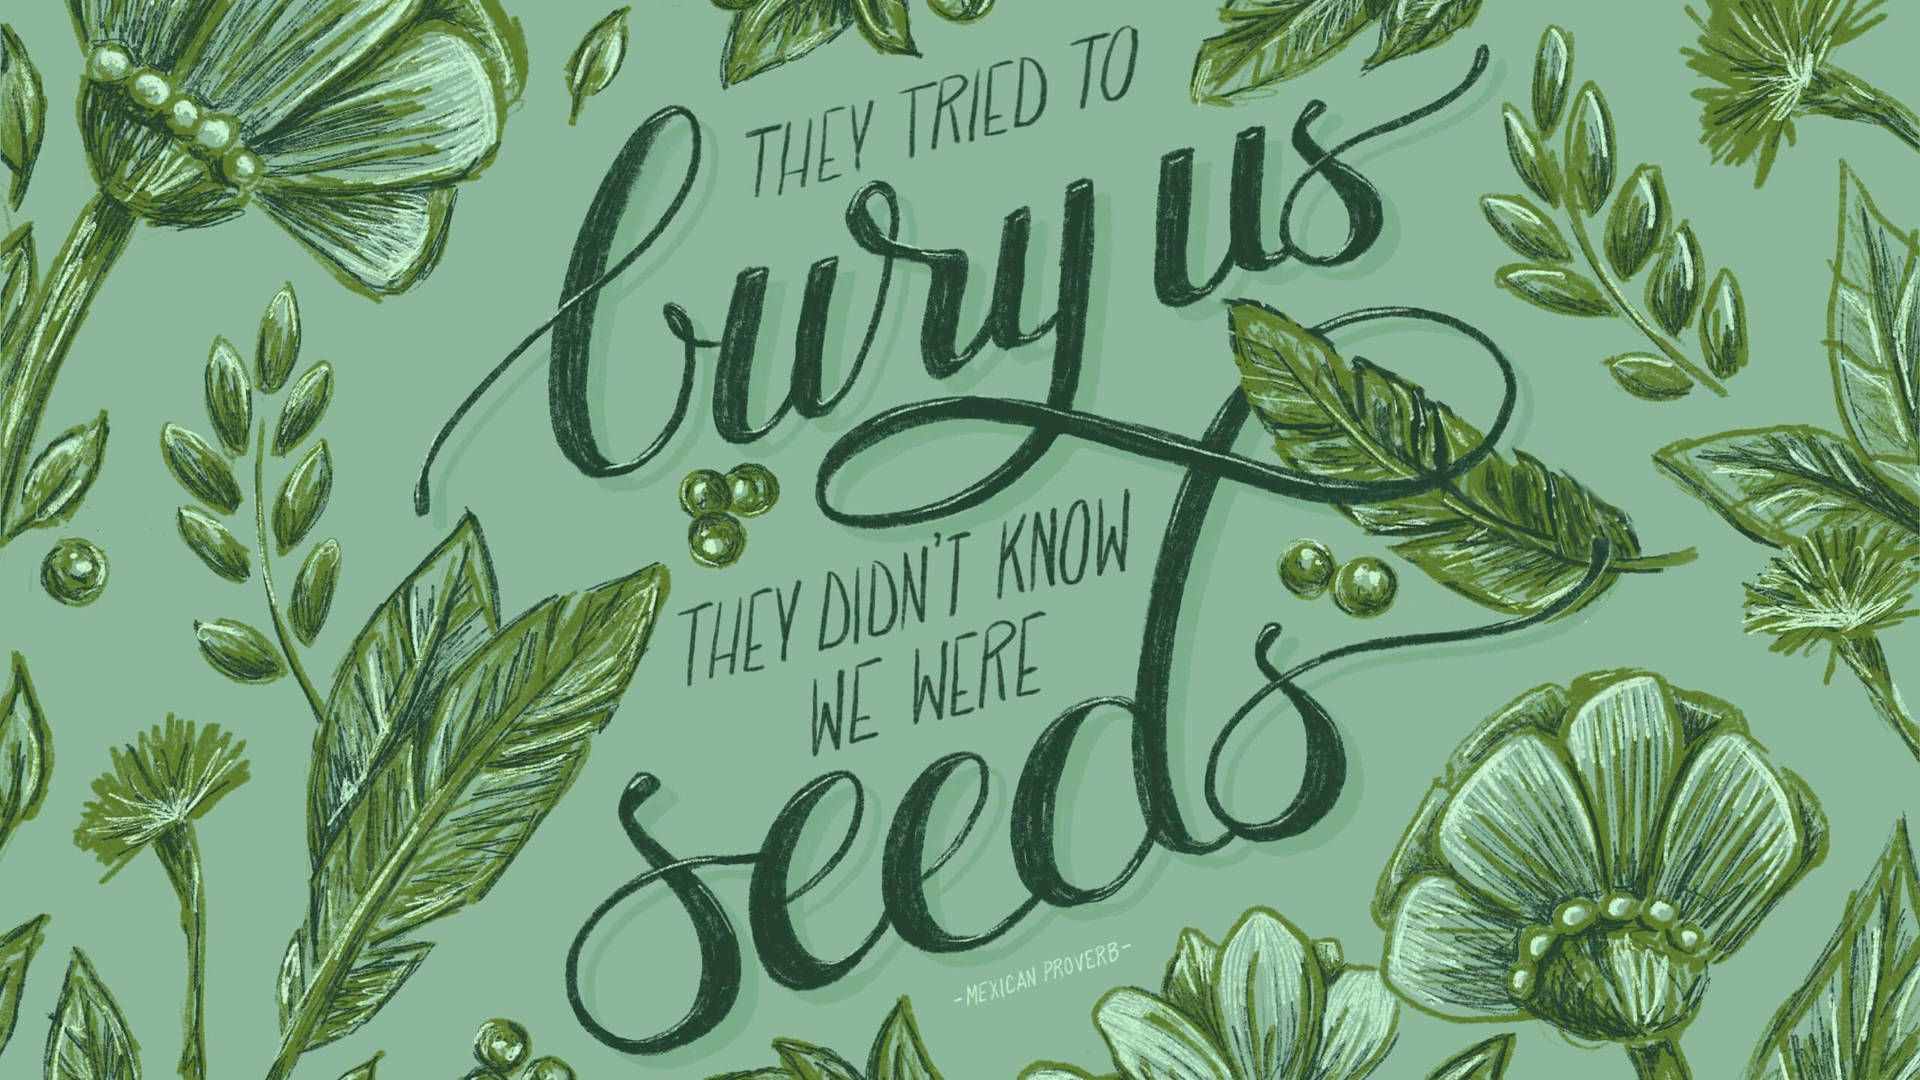 They tried to bury us, they didn't know we were seeds. - Green, sage green